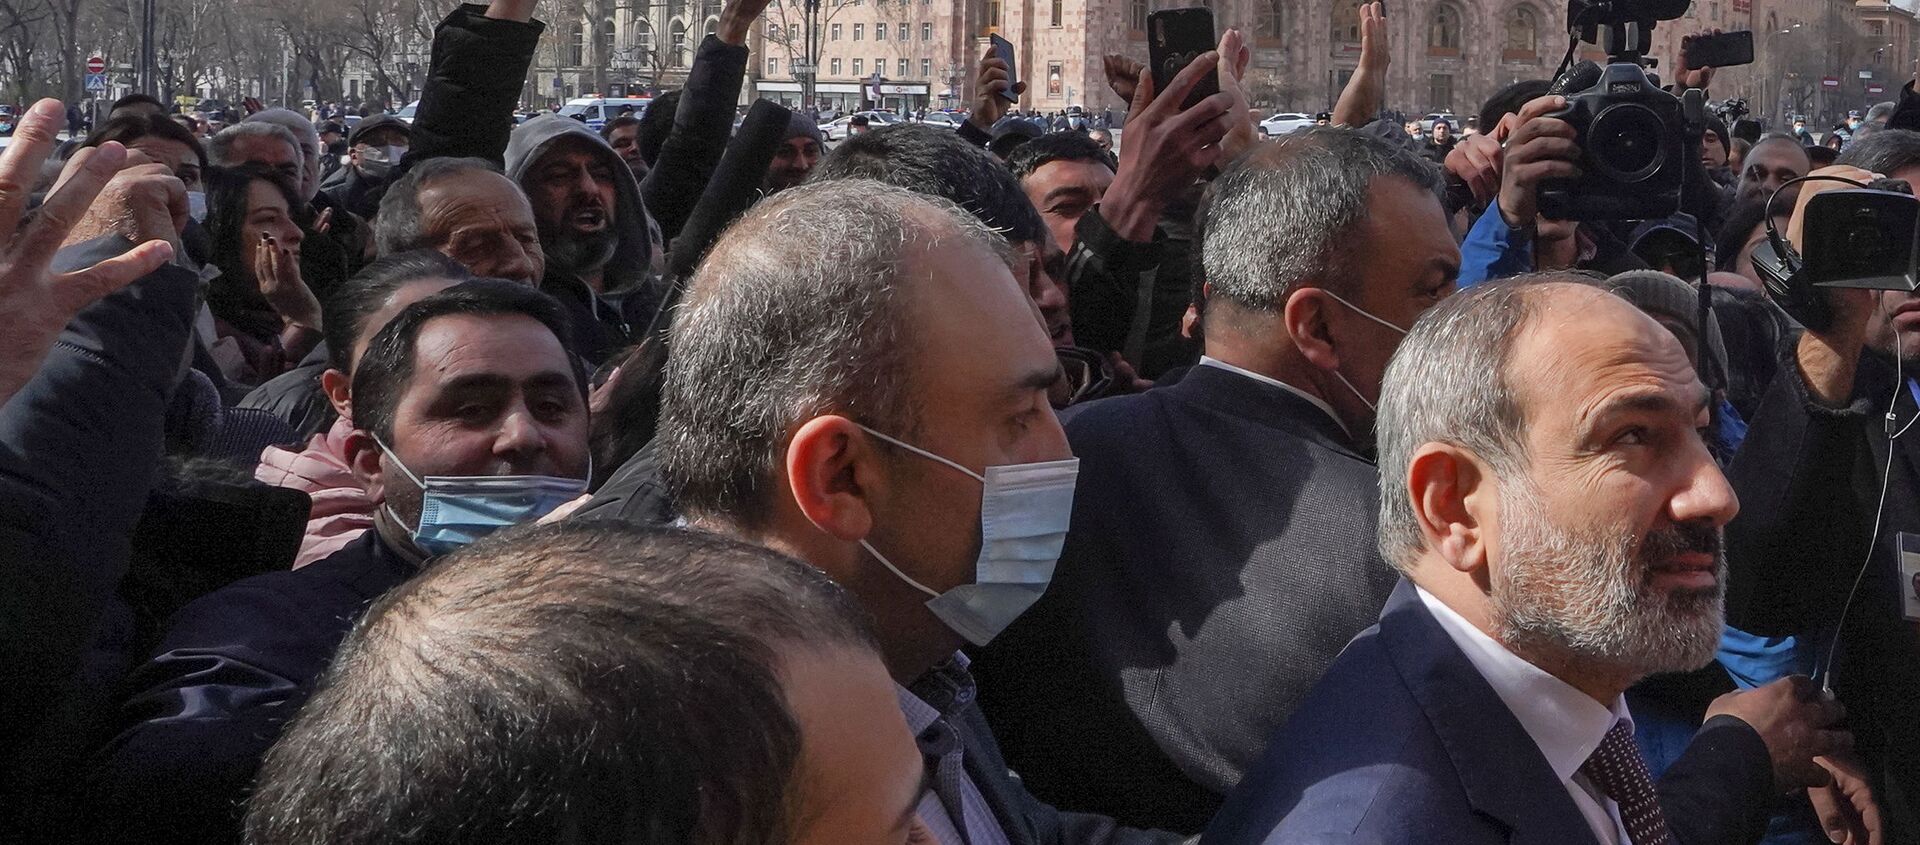 Armenian Prime Minister Nikol Pashinyan meets with participants of a gathering after he called on followers to rally in the centre of Yerevan, Armenia February 25, 2021 - Sputnik International, 1920, 21.06.2021